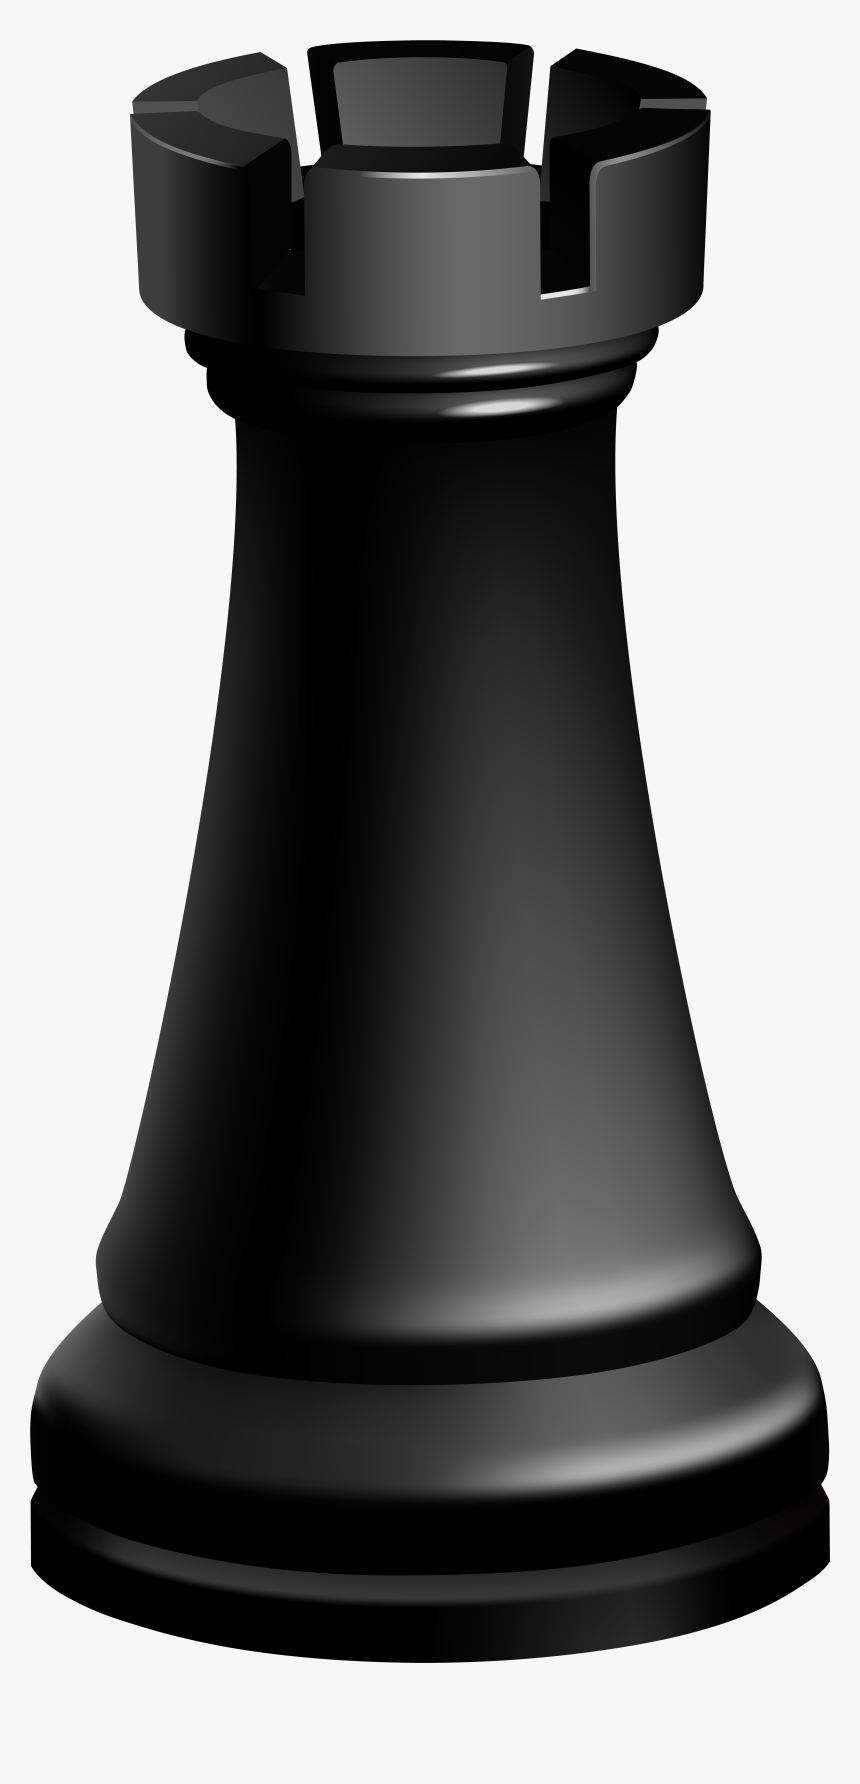 Rook Black Chess Piece Png Clip Art - Chess Piece Rook Clipart, Transparent Png, Free Download